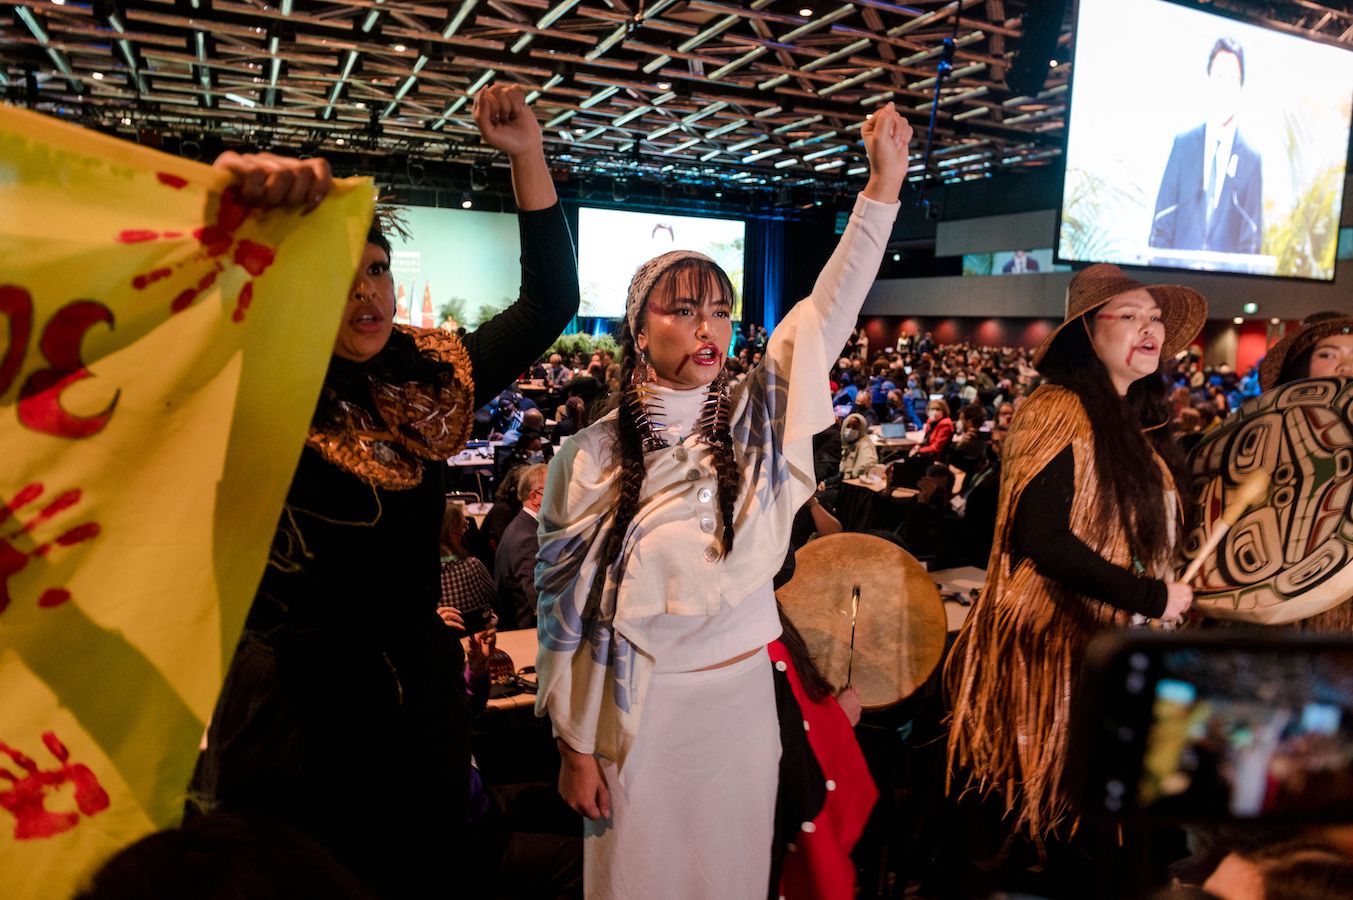 Indigenous protestors raise their fists in a large conference room